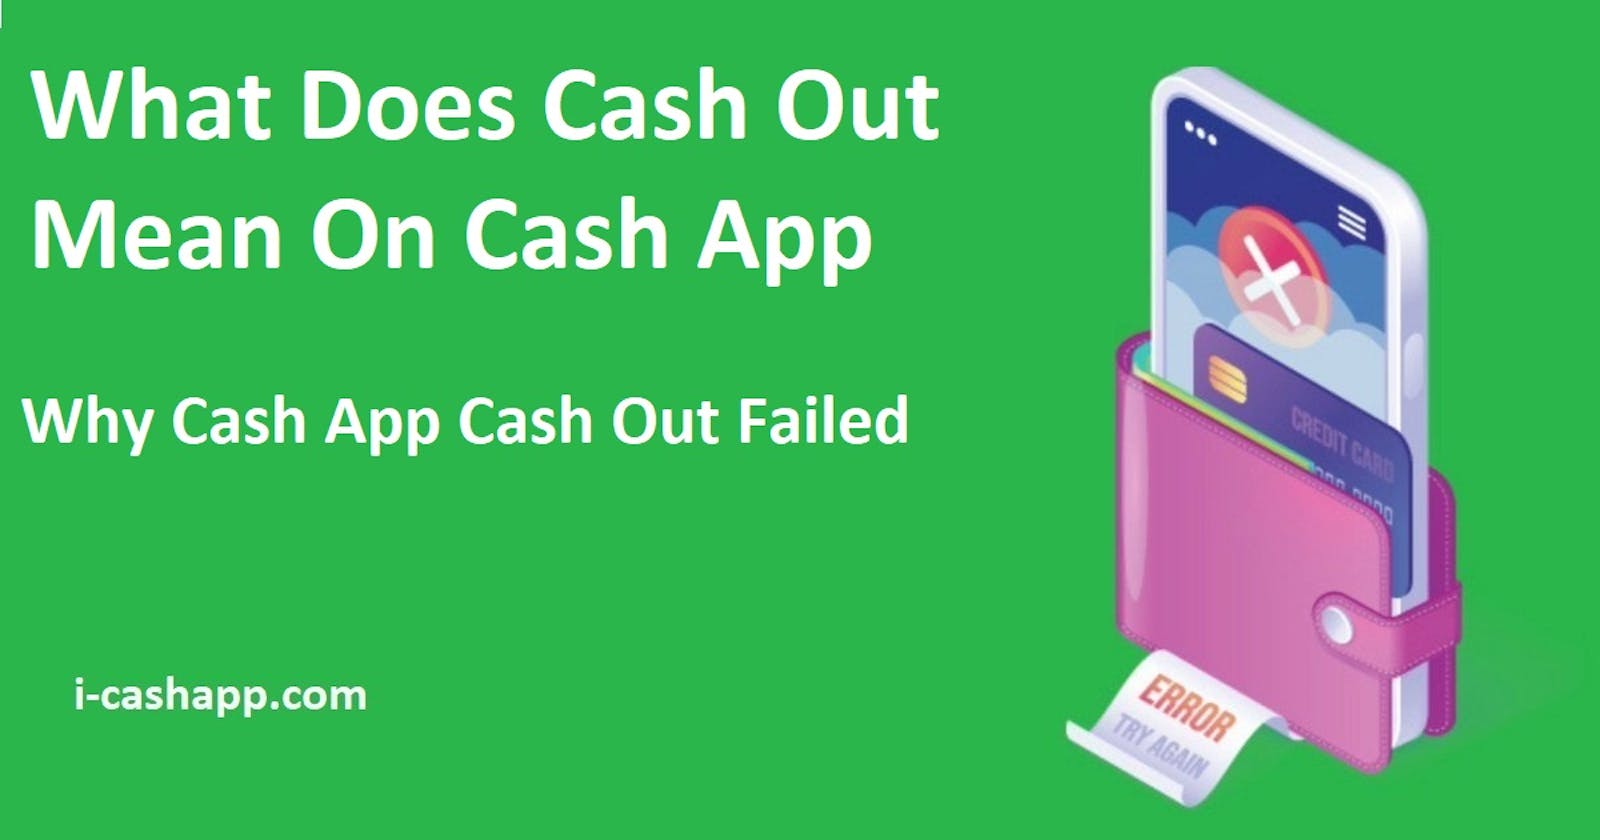 What does cash out mean on Cash App?